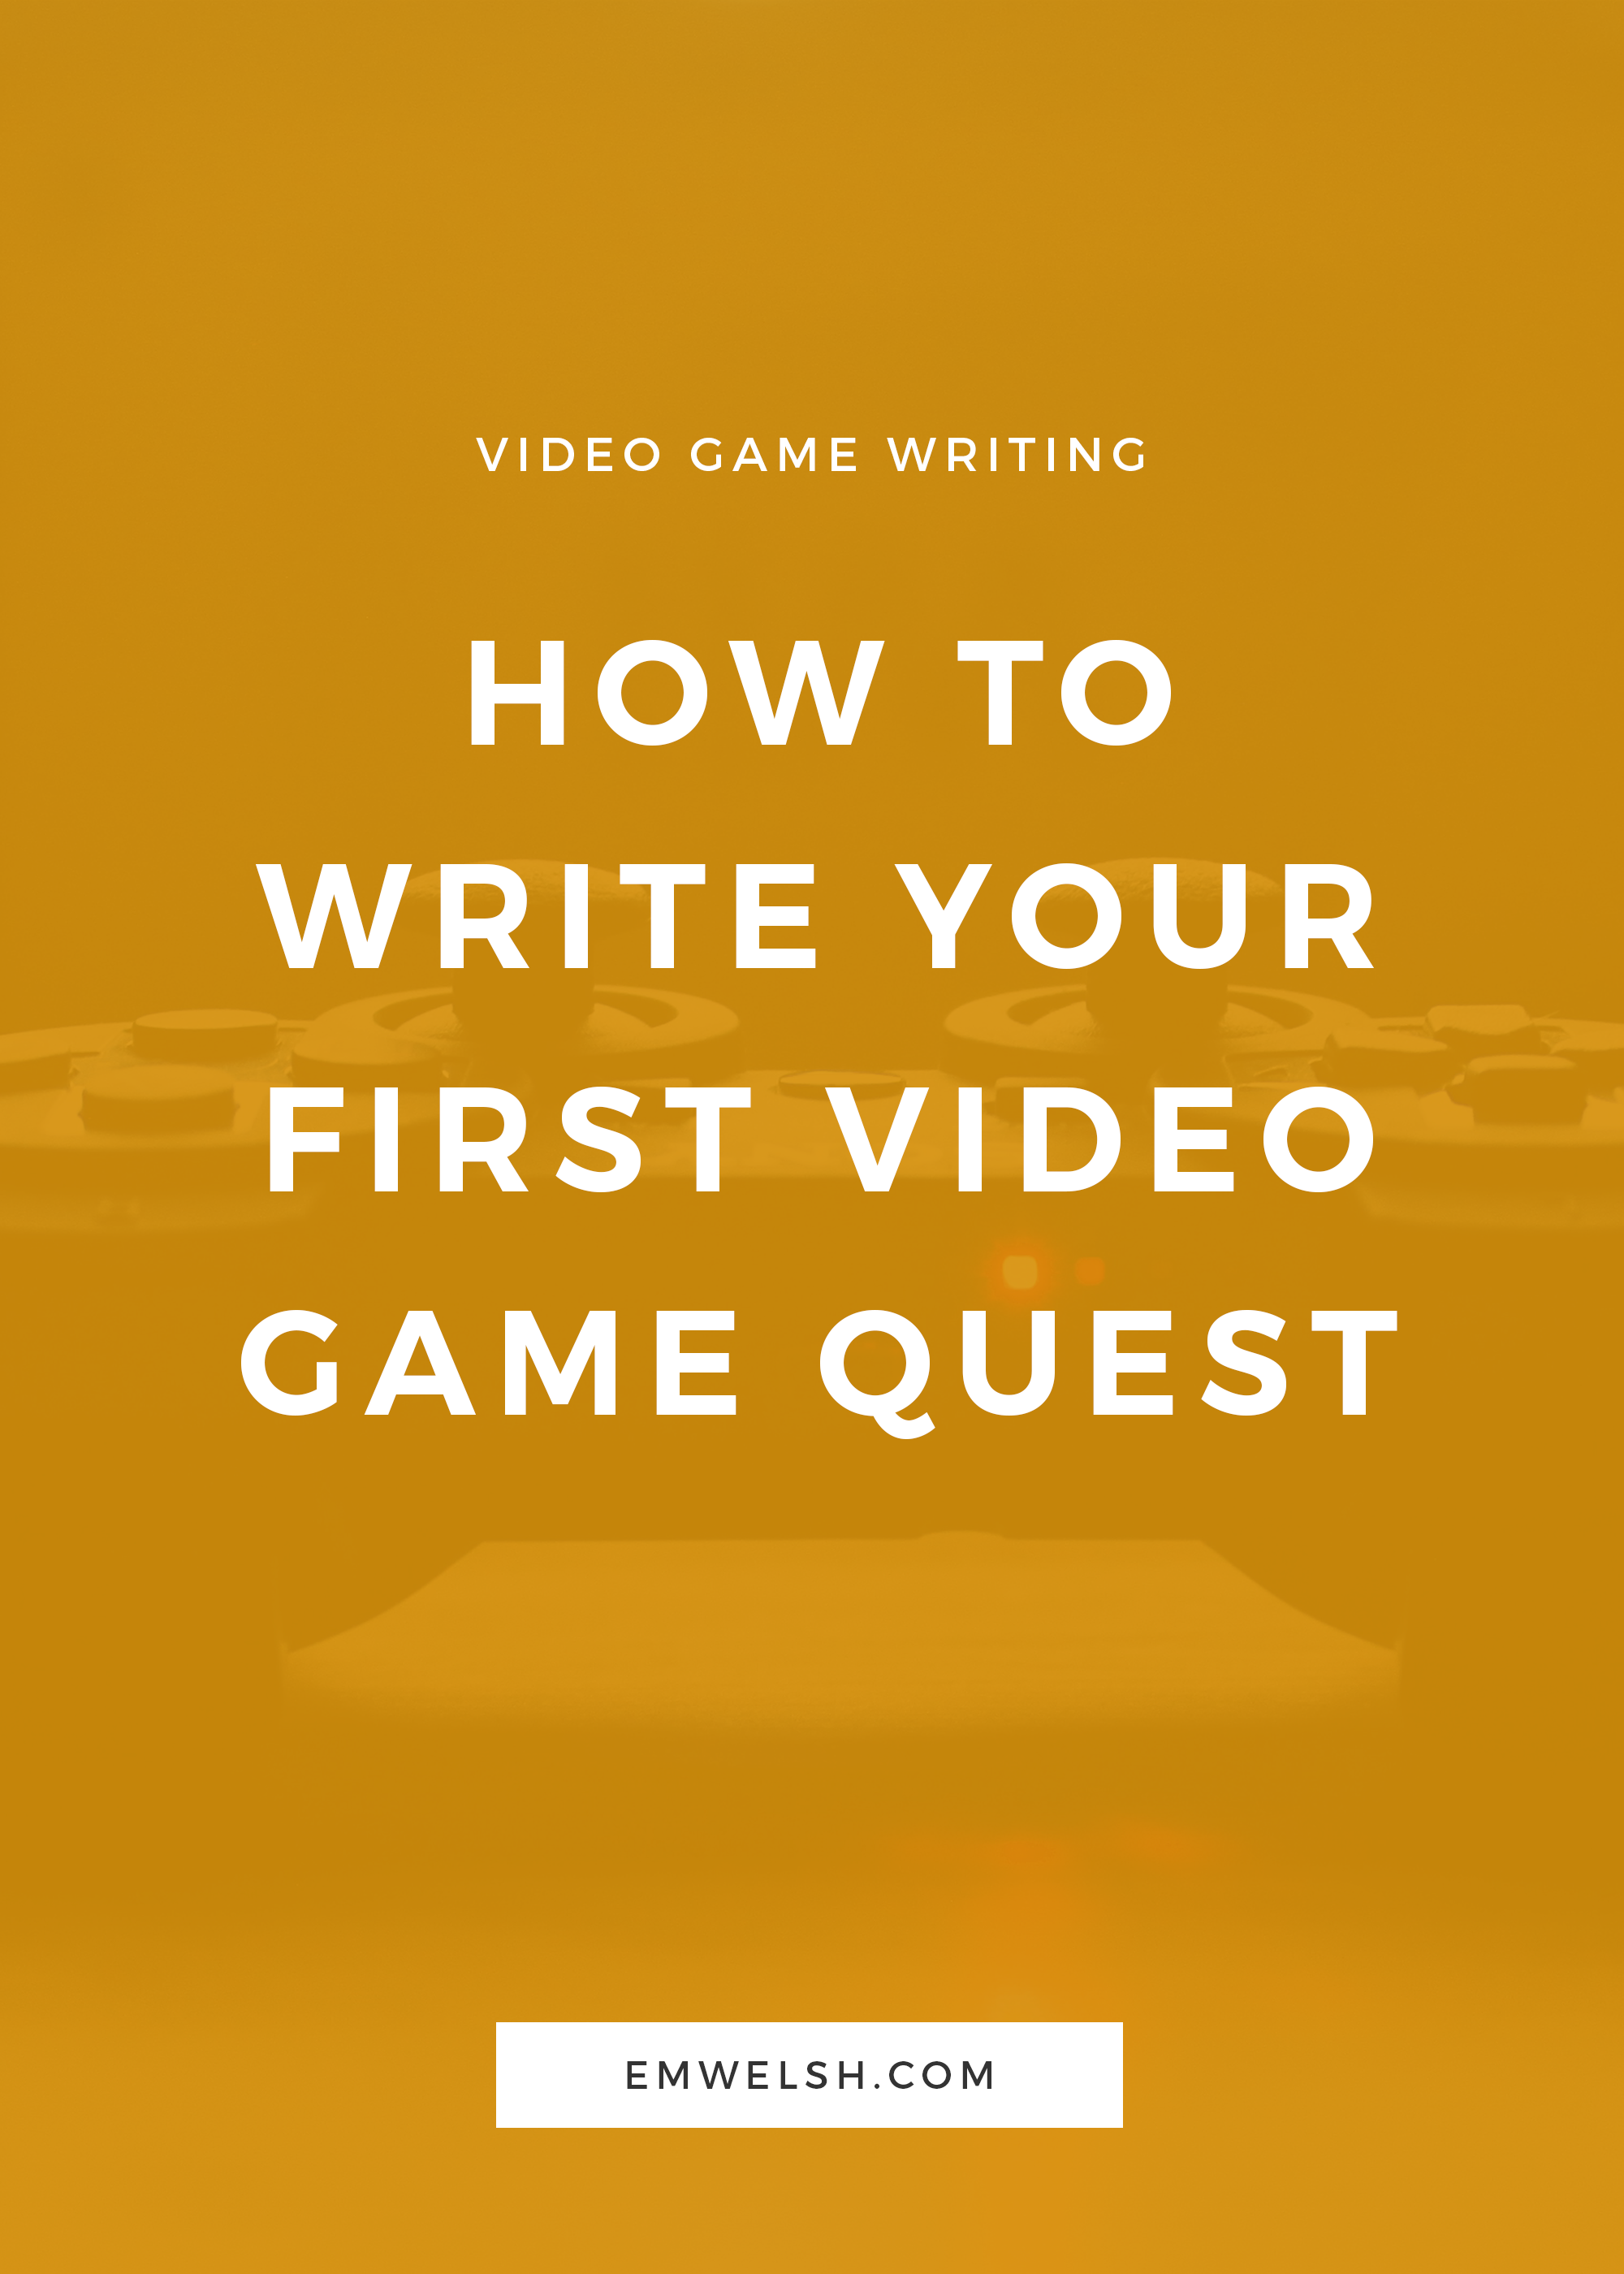 how to write a paragraph about playing online games - good example for you  to write a paragraph 